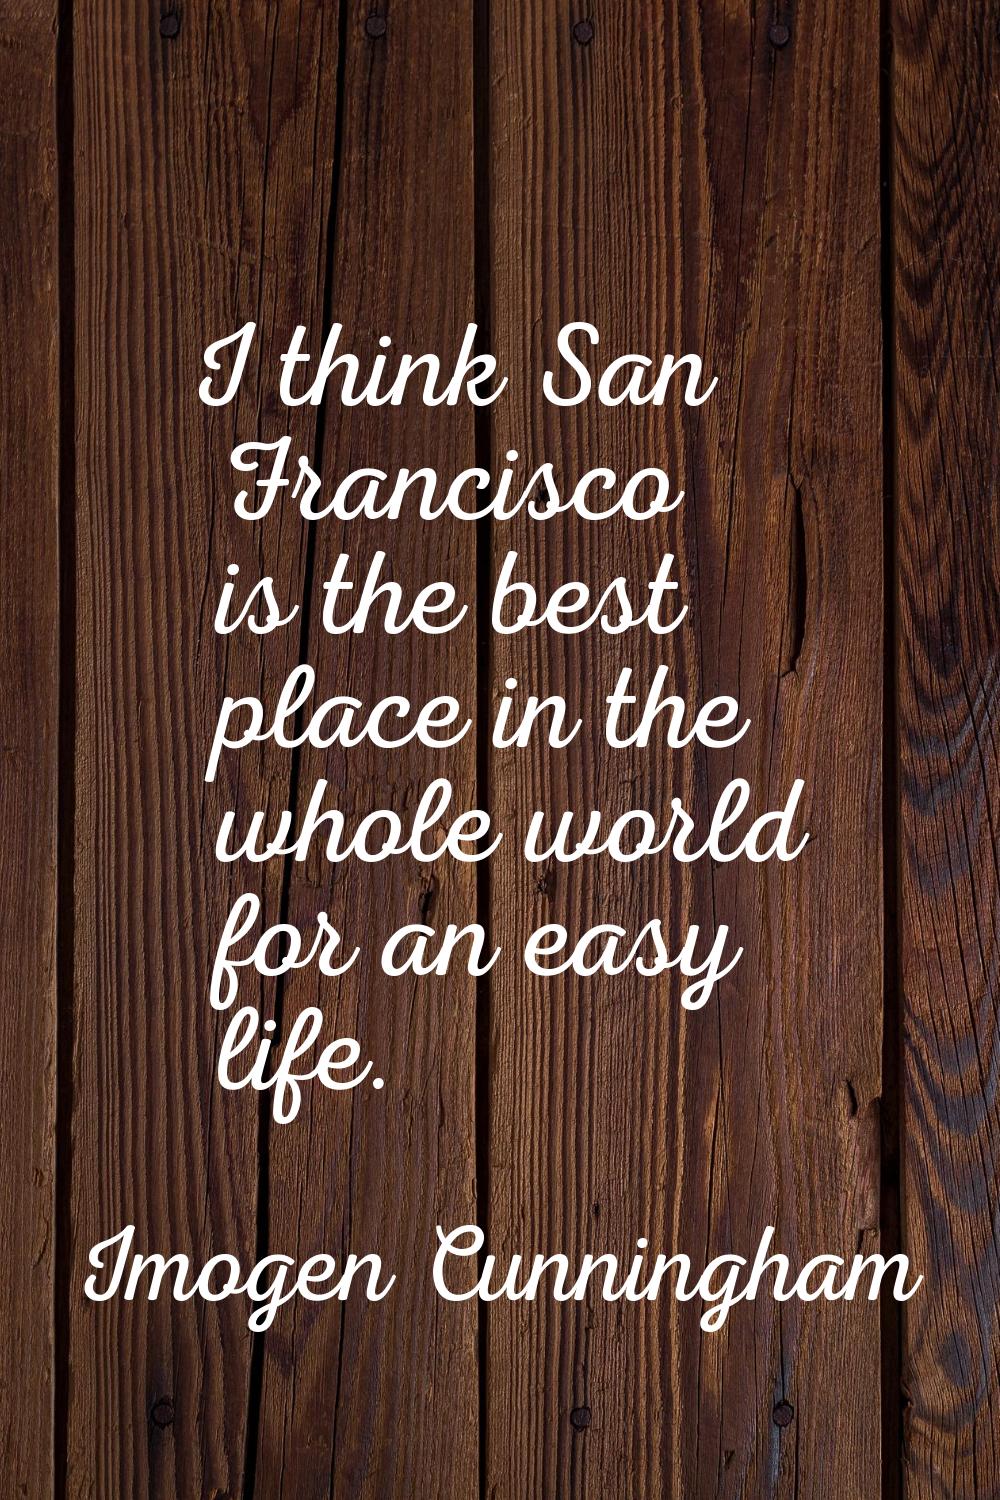 I think San Francisco is the best place in the whole world for an easy life.